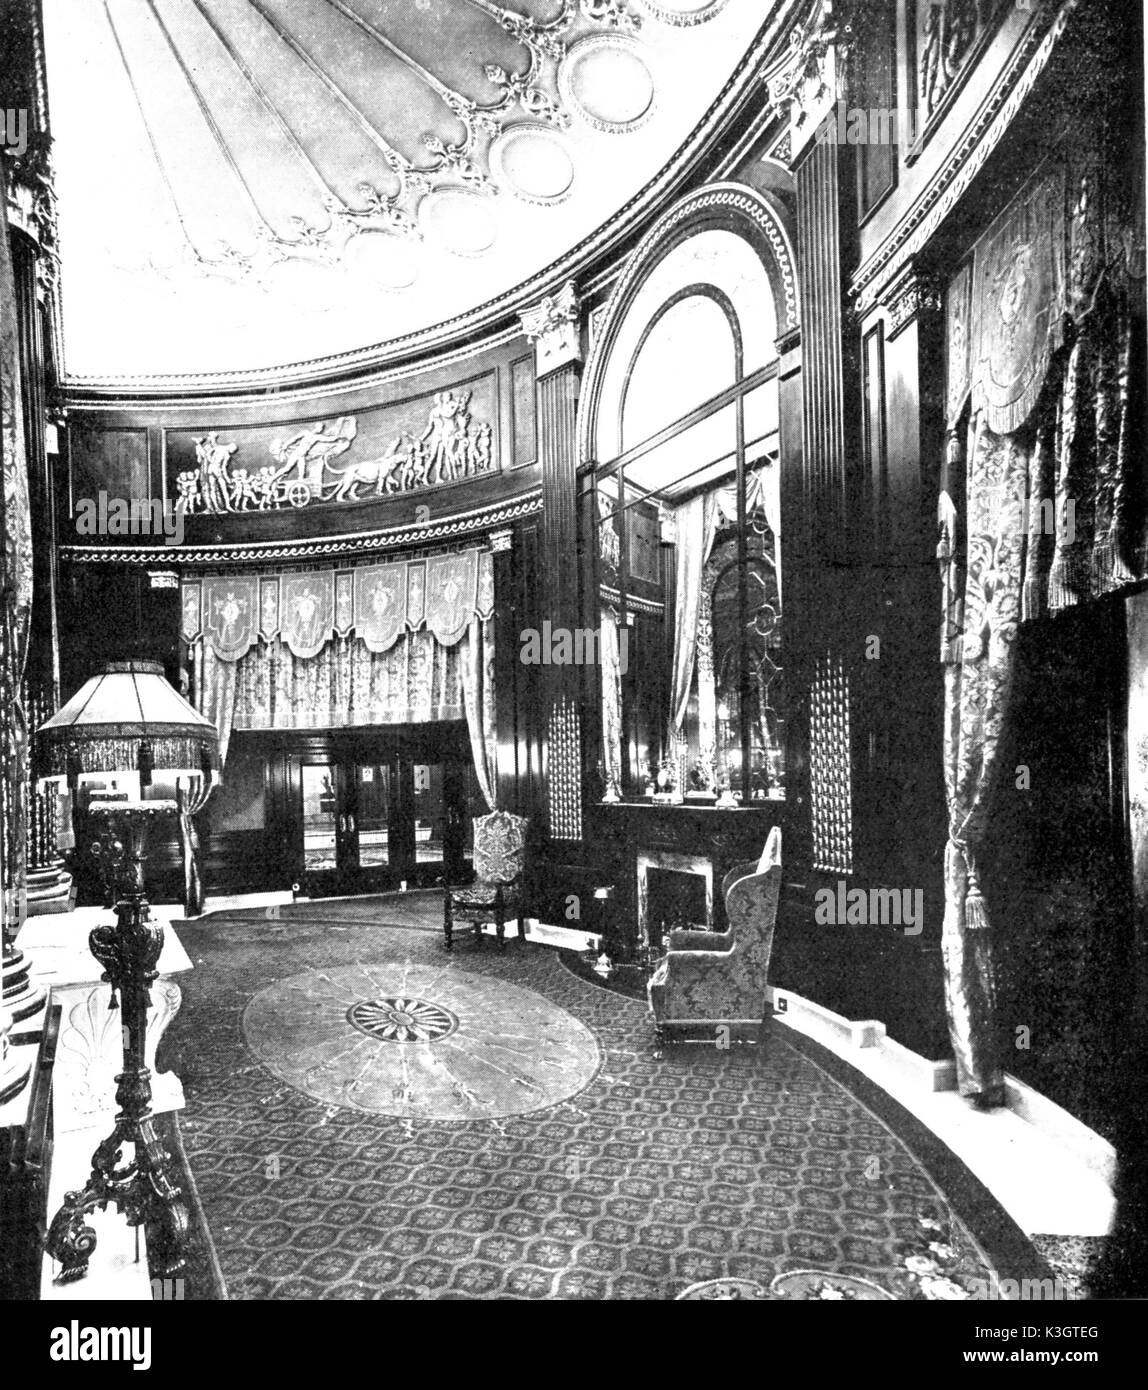 EMPIRE CINEMA/THEATRE, LEICESTER SQUARE, LONDON Grand Entrance to the Tea Lounge at the re-opening of the theatre after refurbishment in 1928 EMPIRE CINEMA / THEATRE, LEICESTER SQUARE, LONDON Grand Entrance to the Tea Lounge at the re-opening of the theatre after refurbishment in 1928 Stock Photo